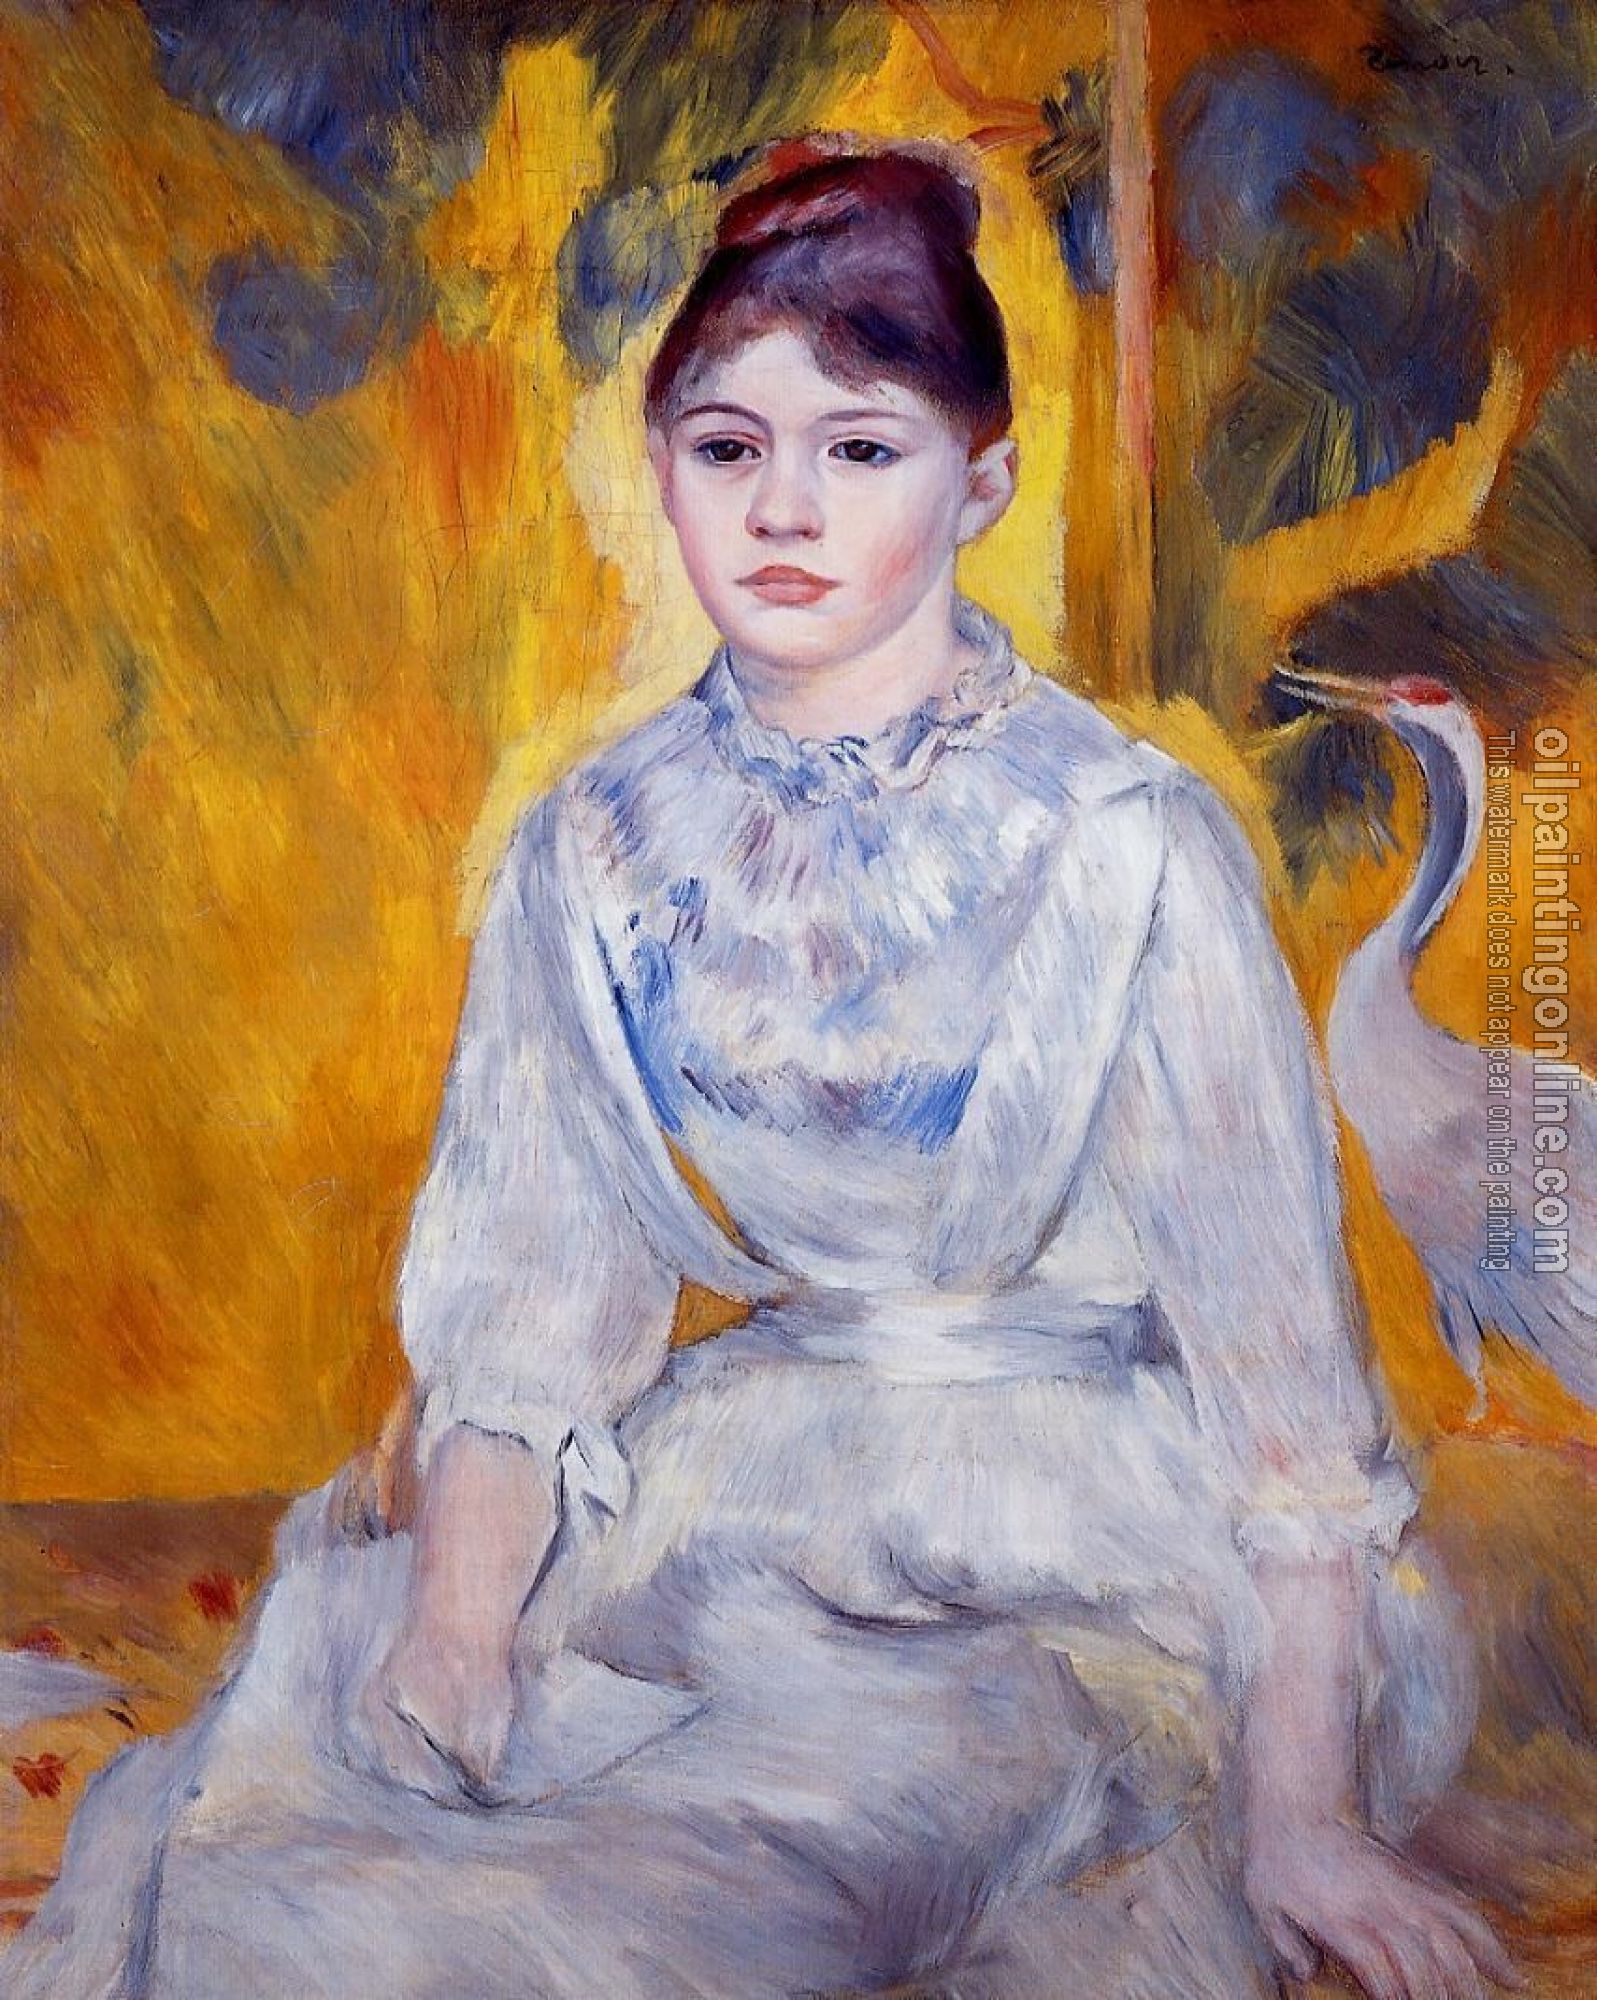 Renoir, Pierre Auguste - Young Woman with Crane